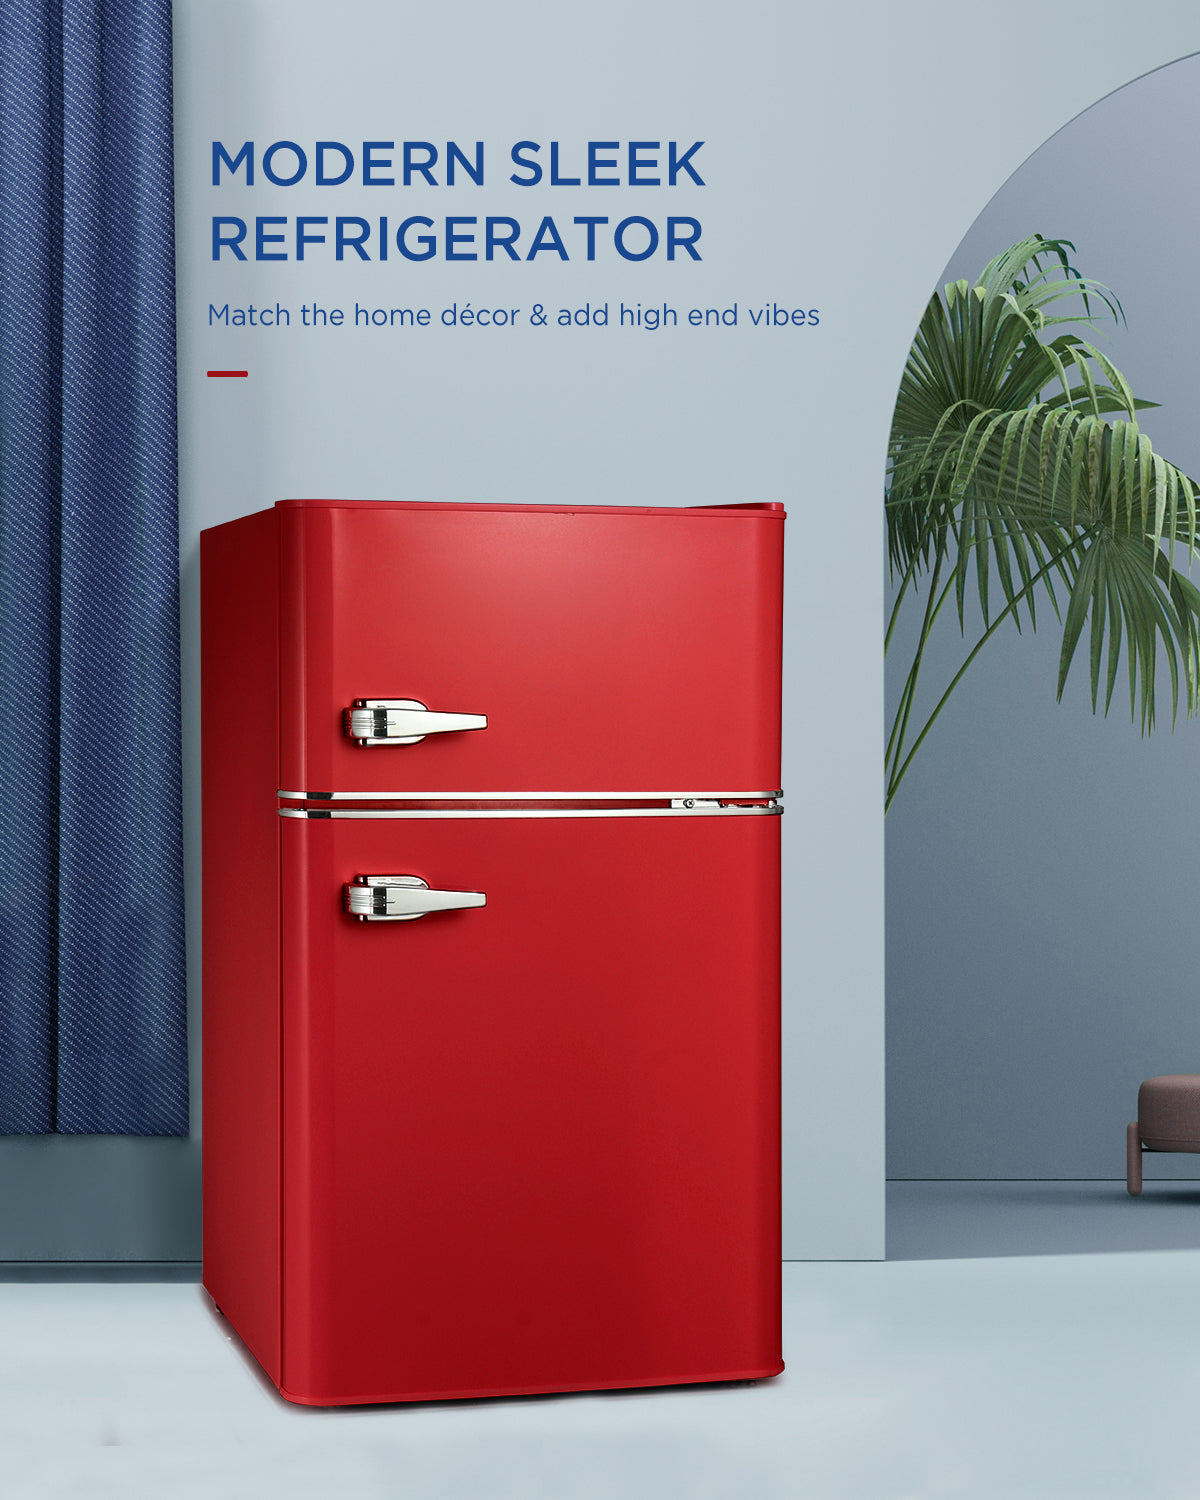 Northair 3.2 Cu ft Compact Mini Refrigerator Separate Freezer, Small Fridge Double 2-Door Adjustable Removable Retro Stainless Steel Shelves,Red